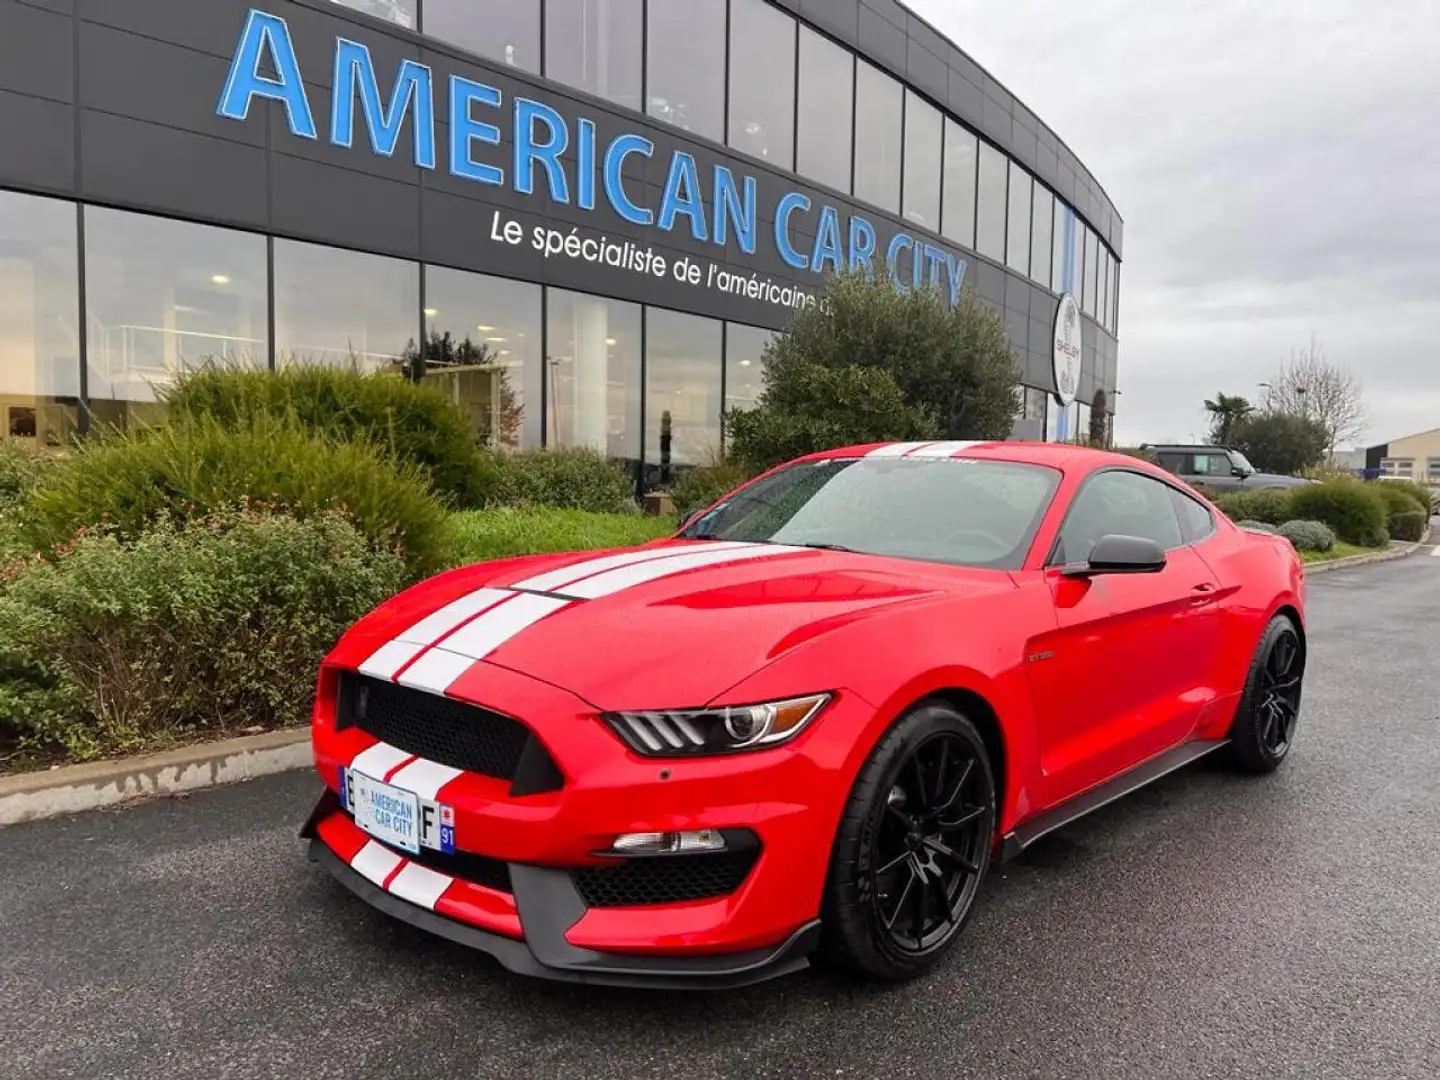 Ford Mustang Shelby GT350 V8 5.2L  - PAS DE MALUS Rouge - 1